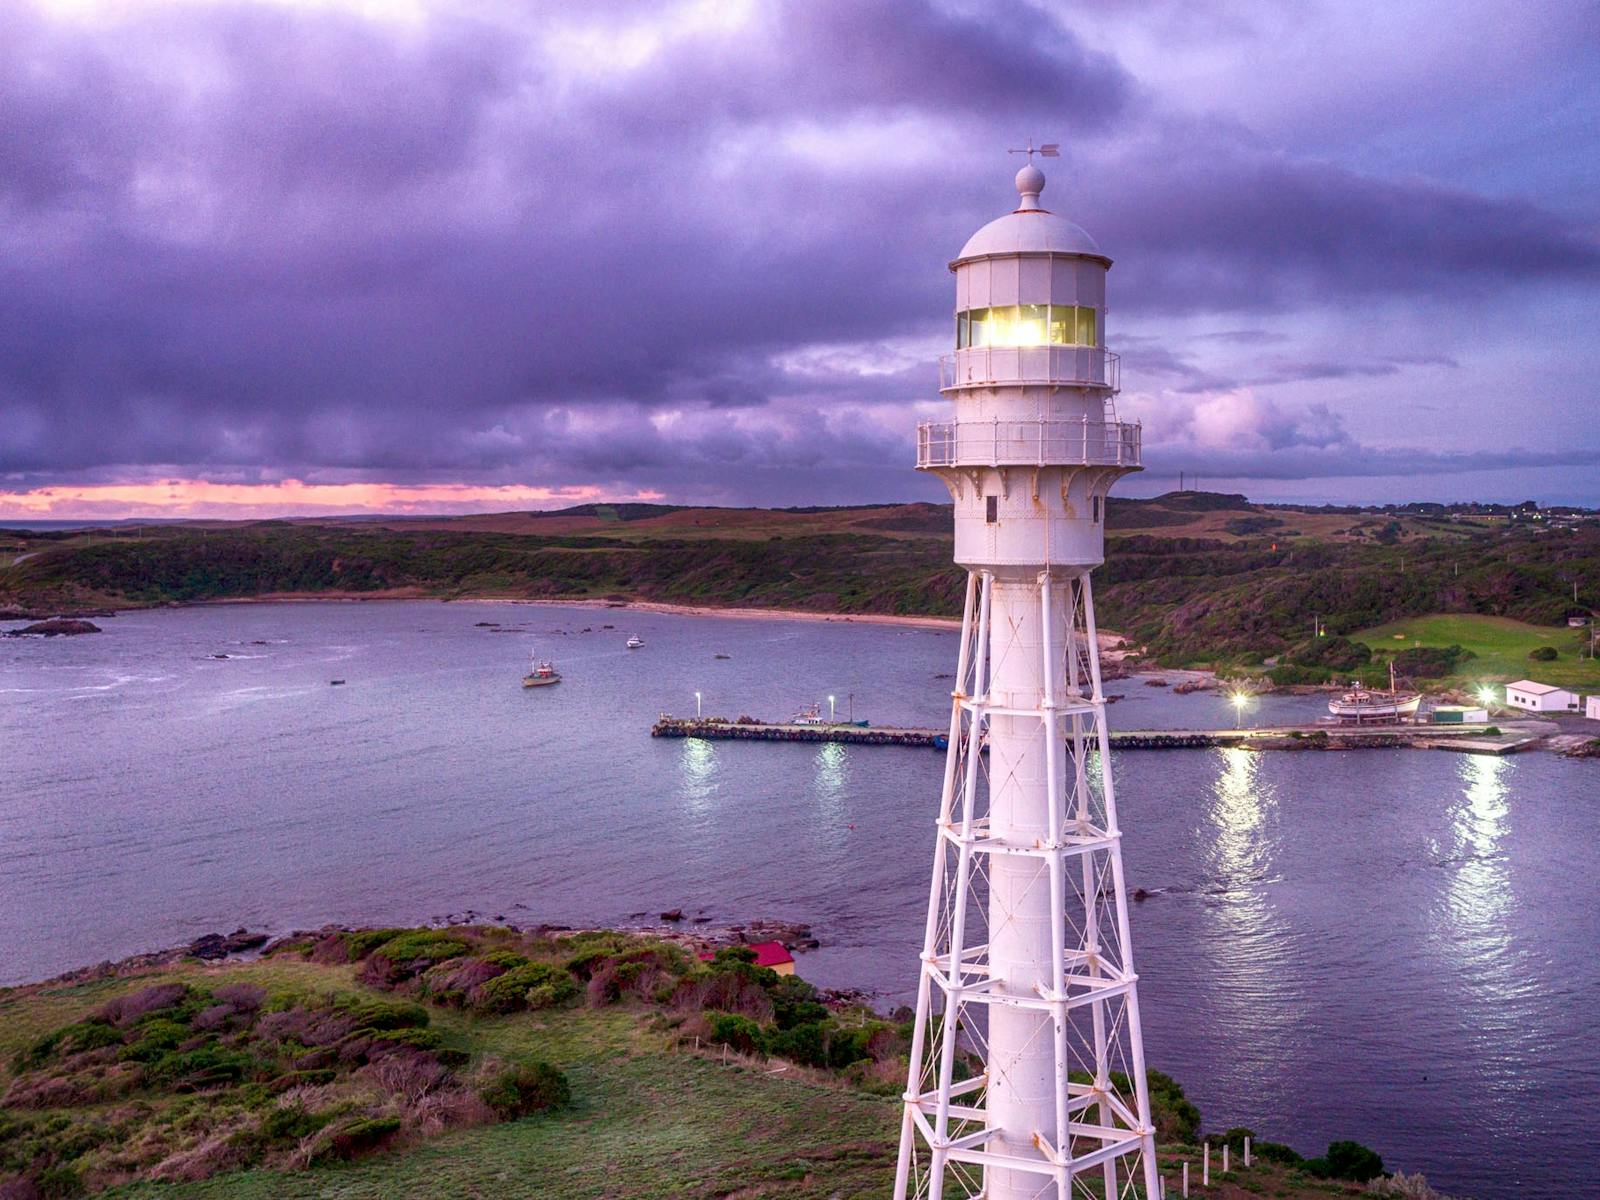 View of the Currie Lighthouse with Currie Harbour in the background.  The photo was taken at dusk